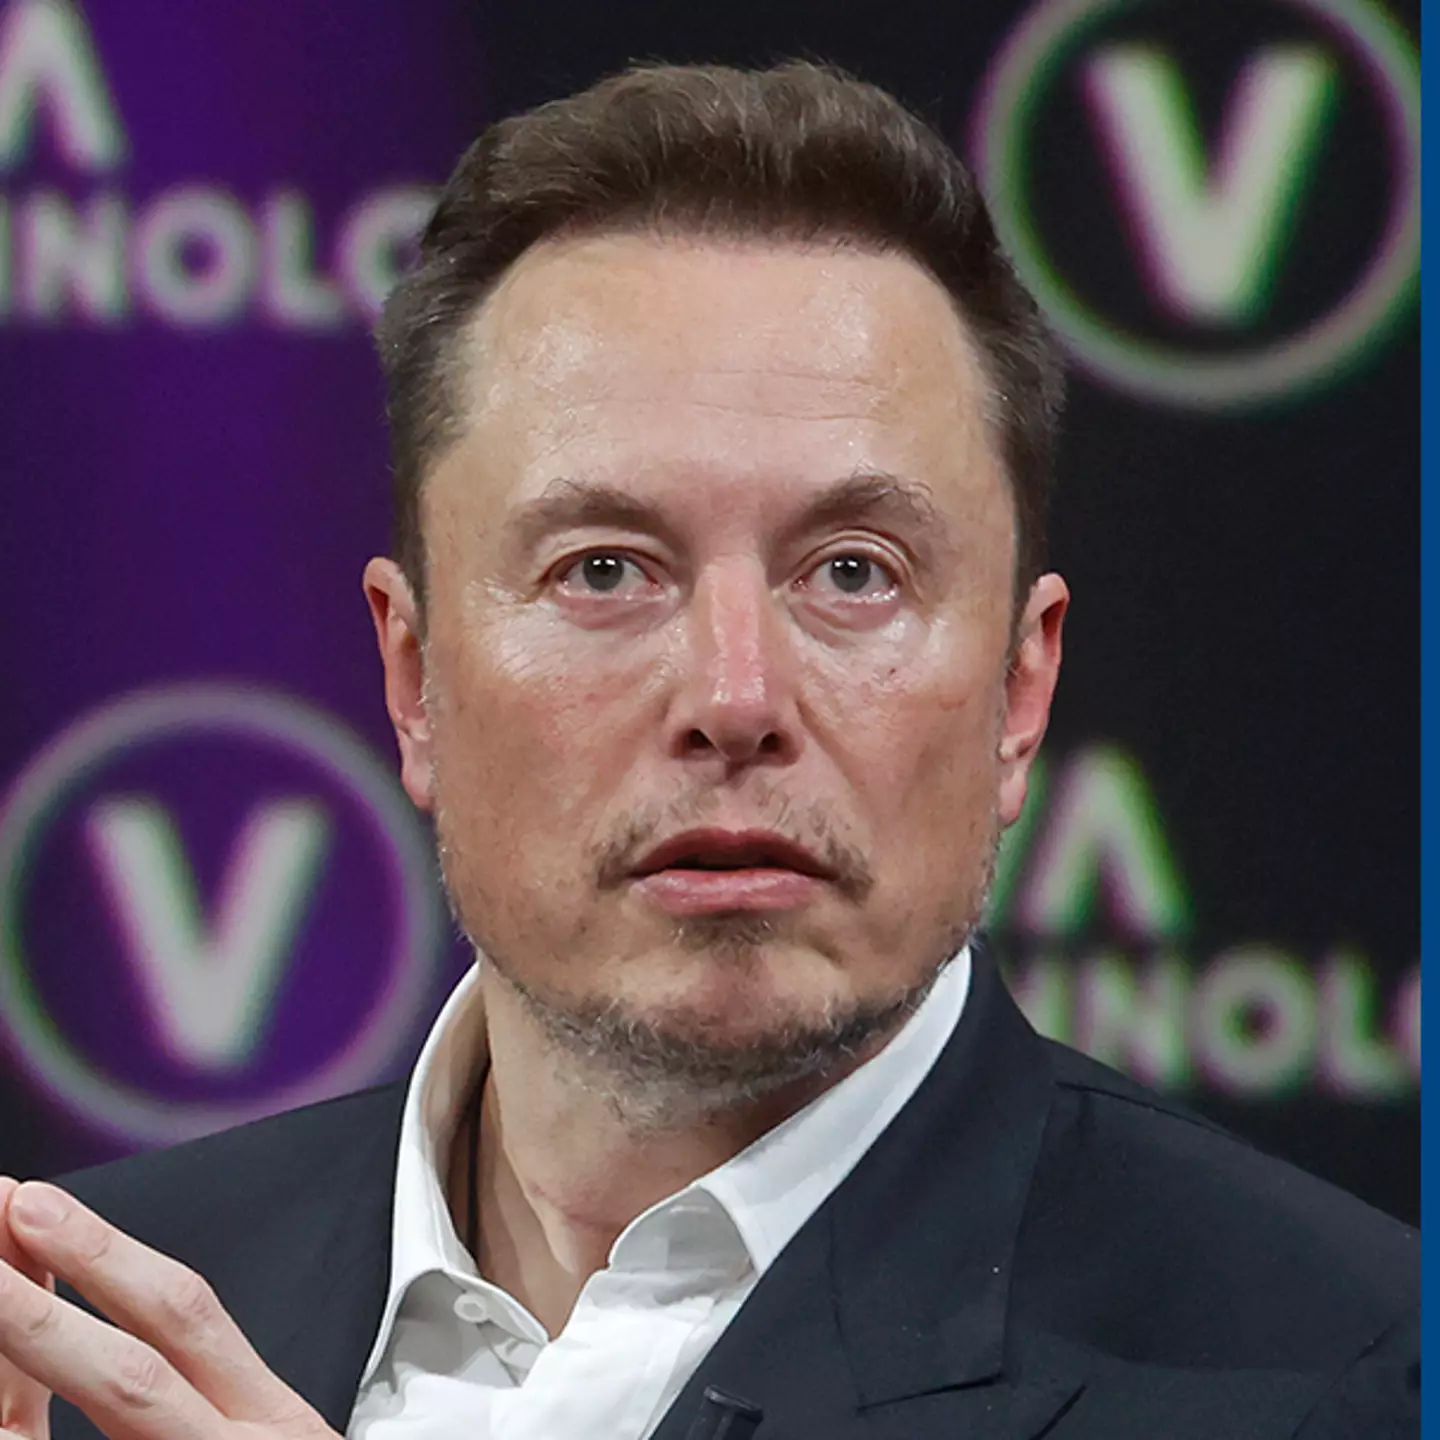 Elon Musk used genius method to identify Tesla employee who was leaking confidential information to press